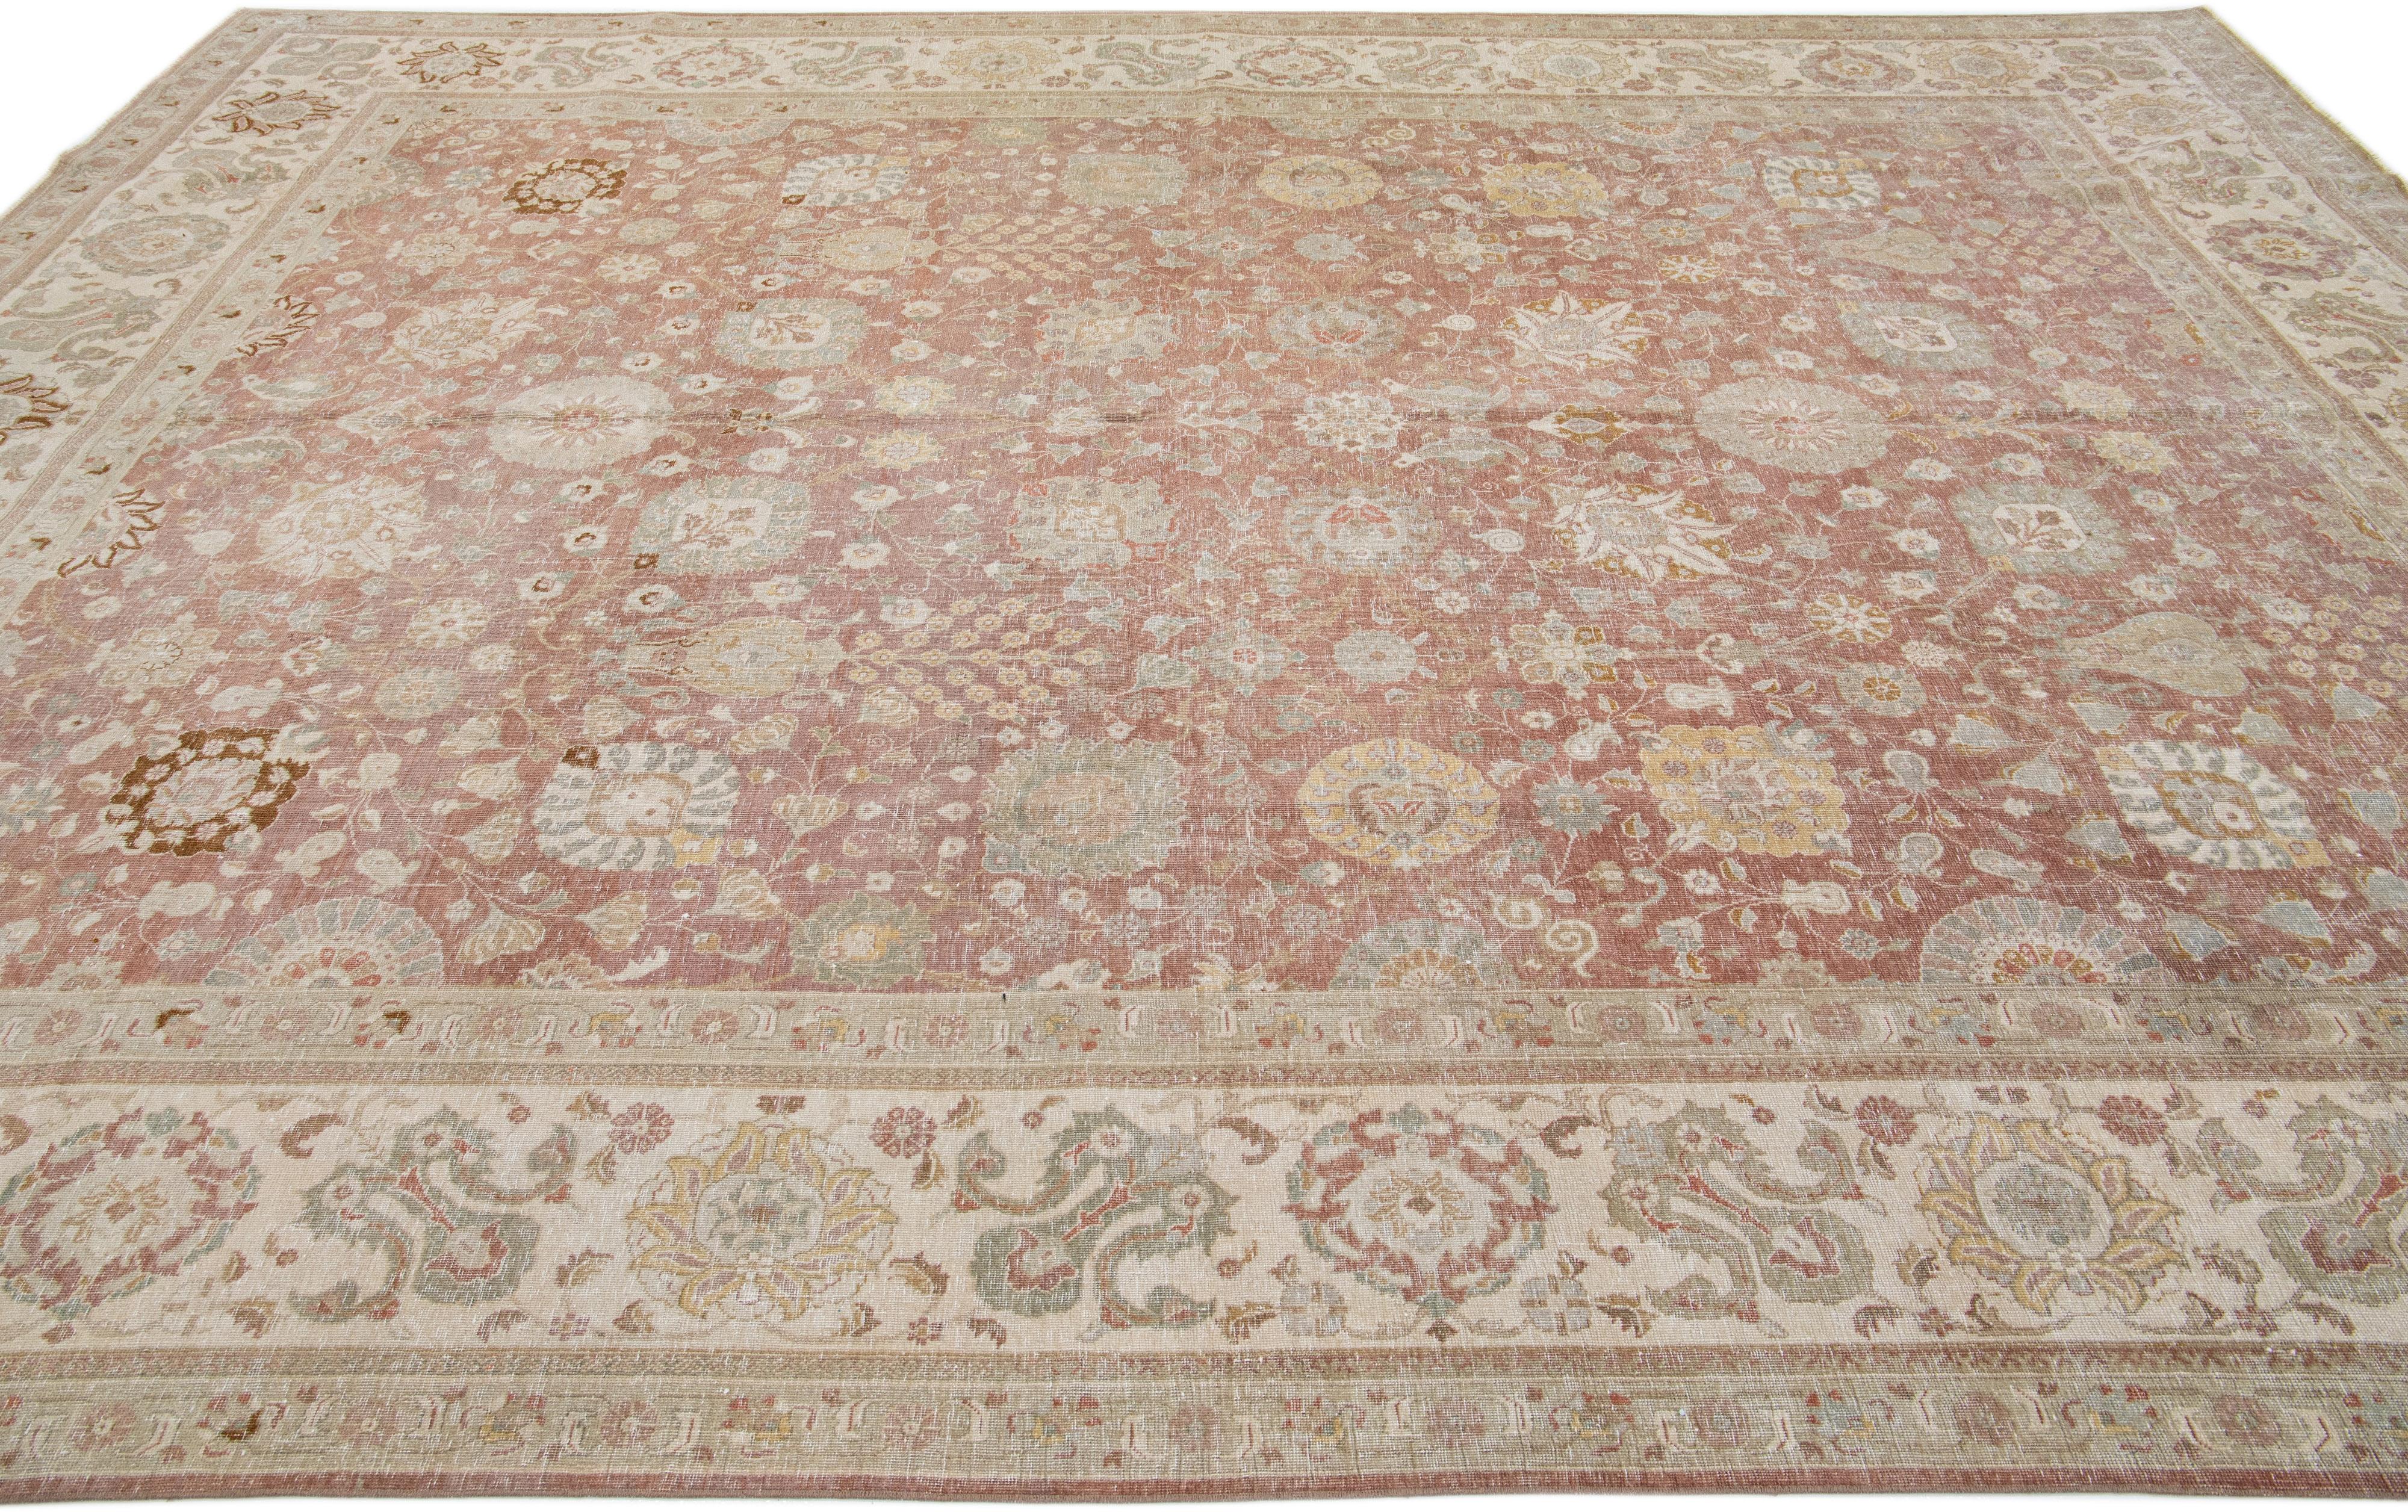 Handmade Antique Persian Tabriz Rust Wool Rug with Floral Design In Good Condition For Sale In Norwalk, CT